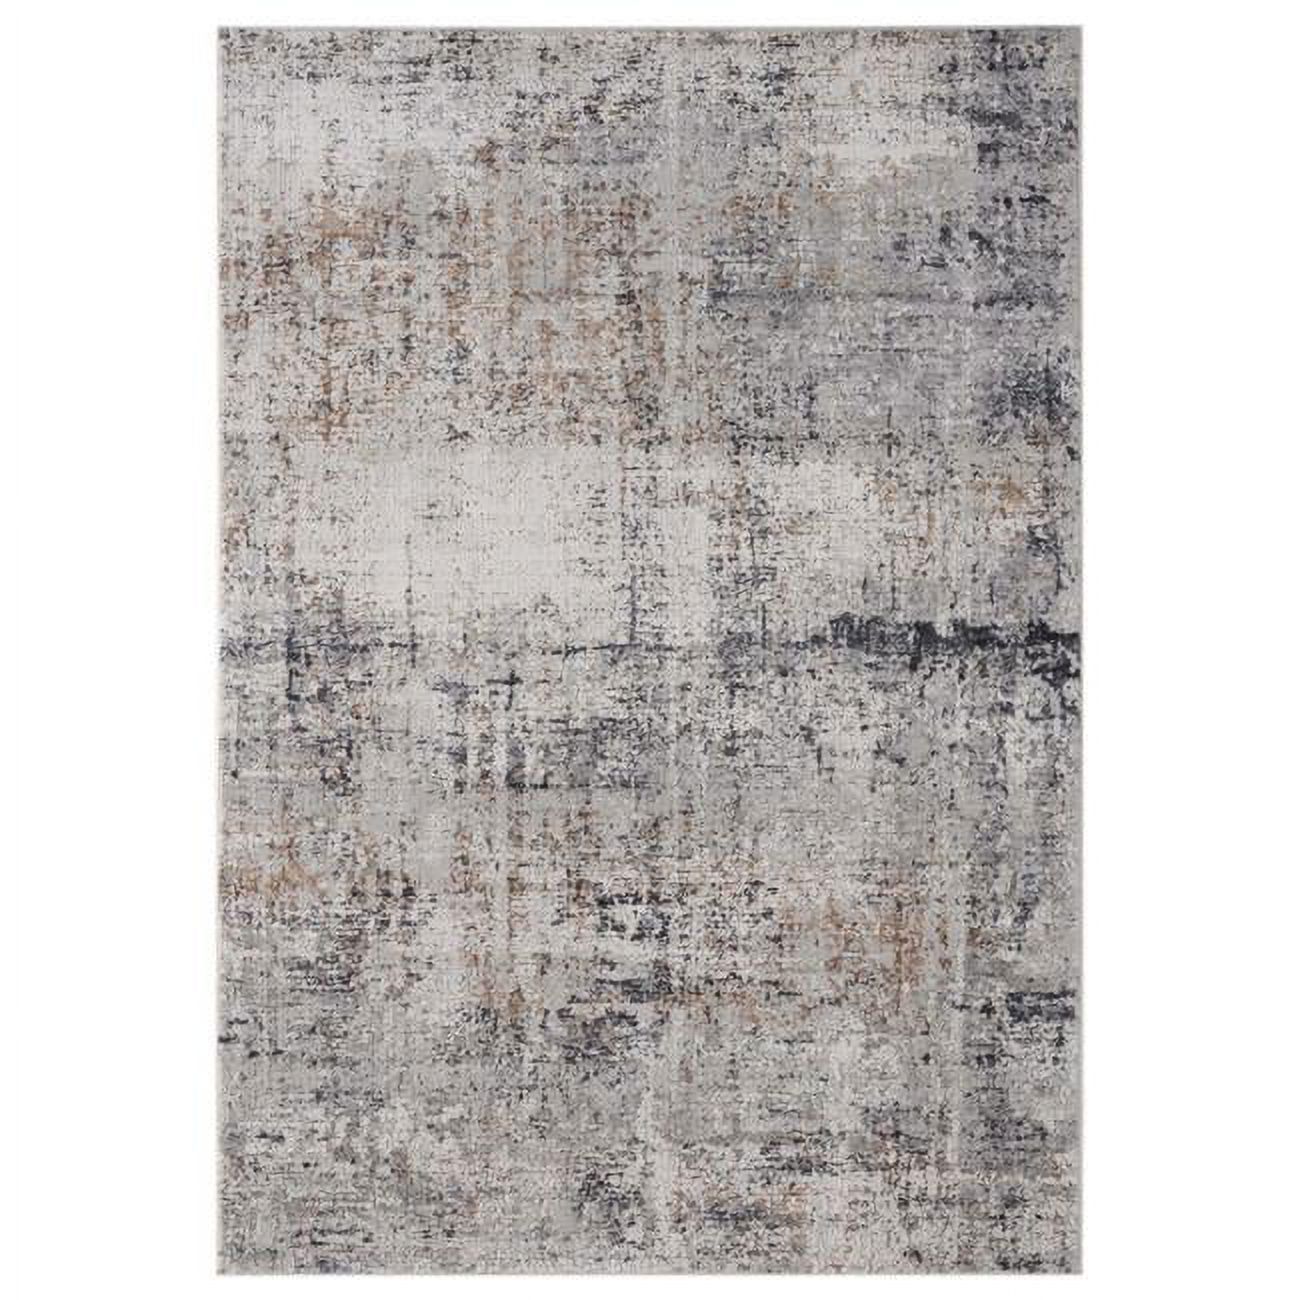 6 x 86" x 0.39" Grey Viscose/Polyester Area Rug - image 1 of 2